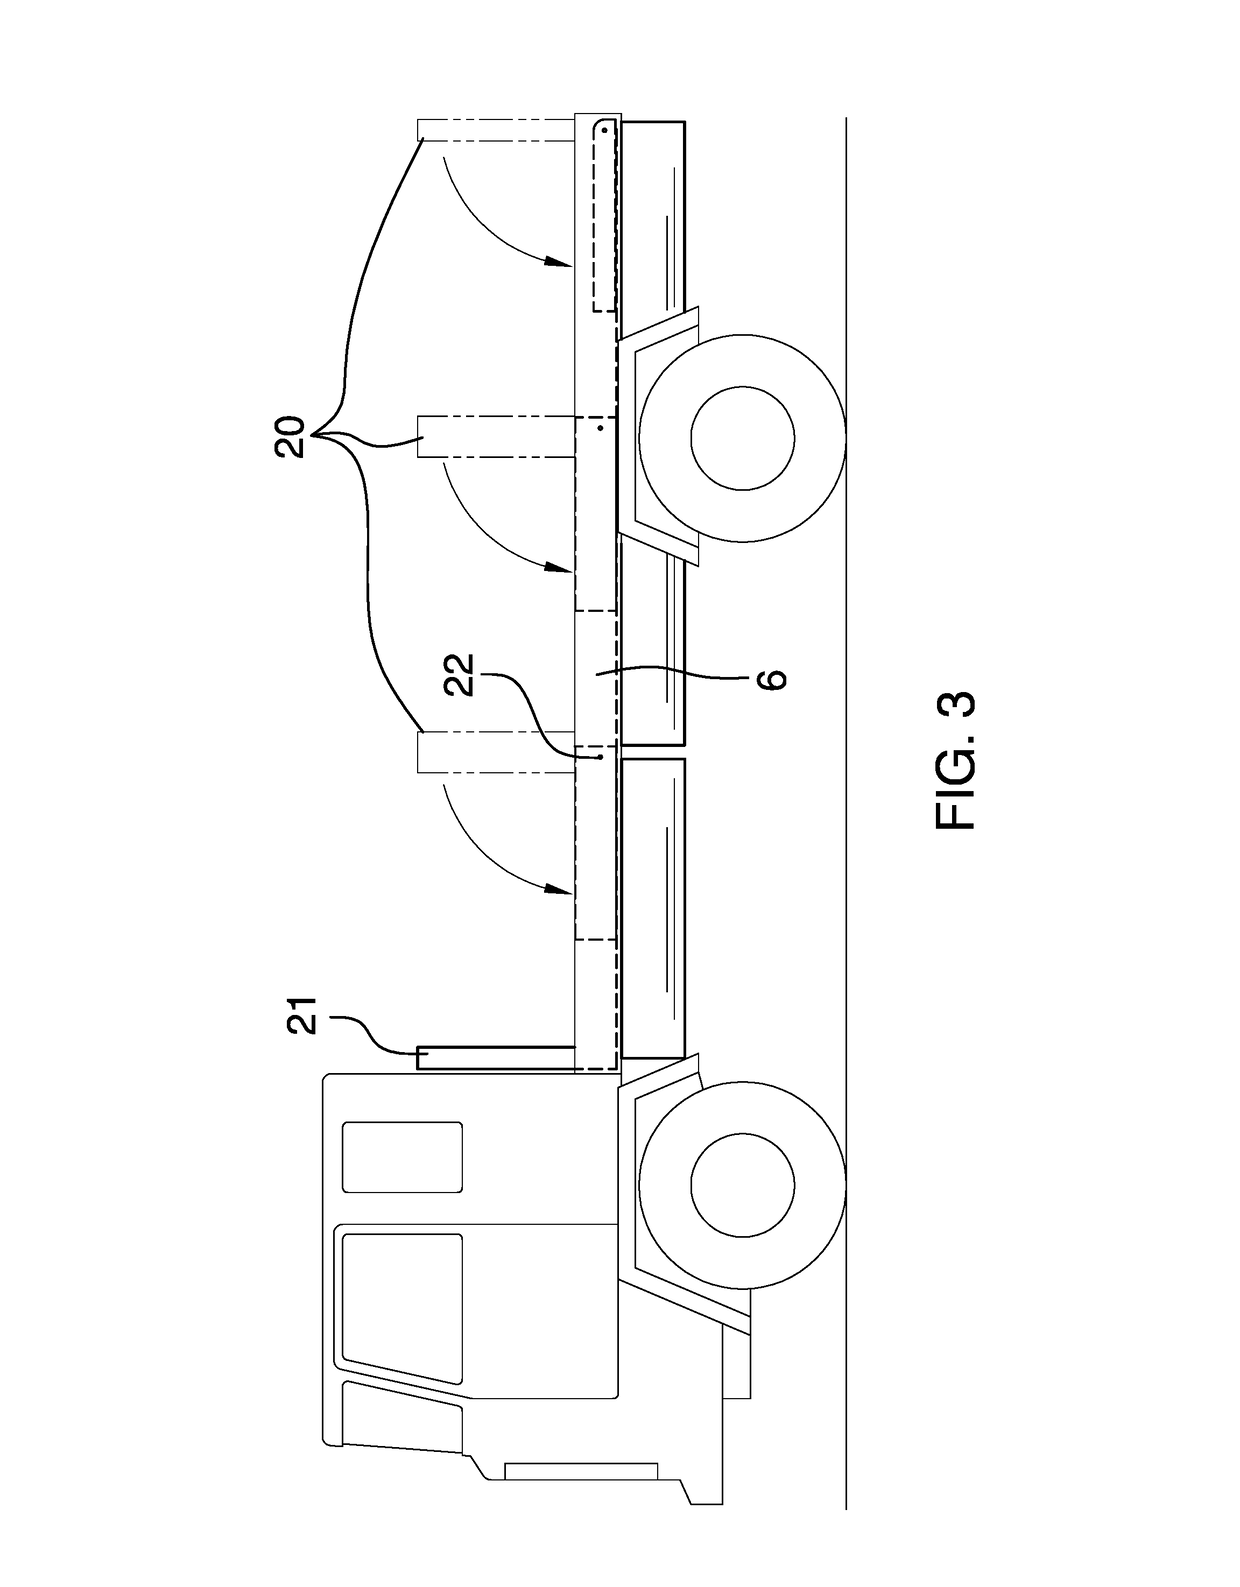 Conversion device to transform a flat bed into a truck bed and the method to use